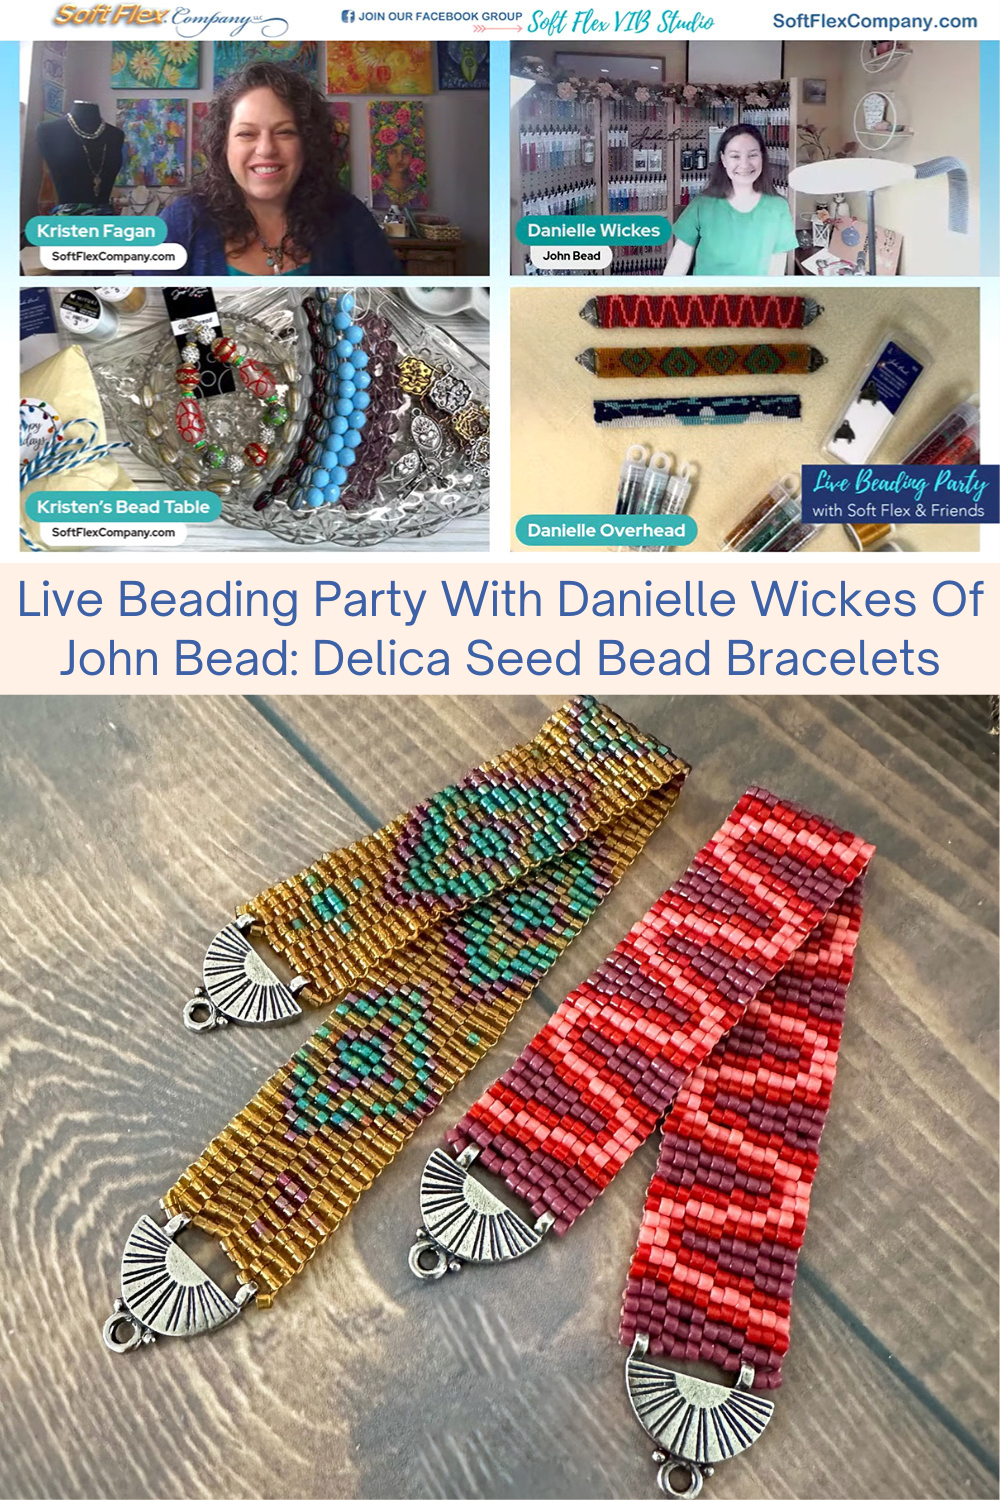 Live Beading Party With Danielle Wickes Of John Bead Delica Seed Bead Bracelets Collage